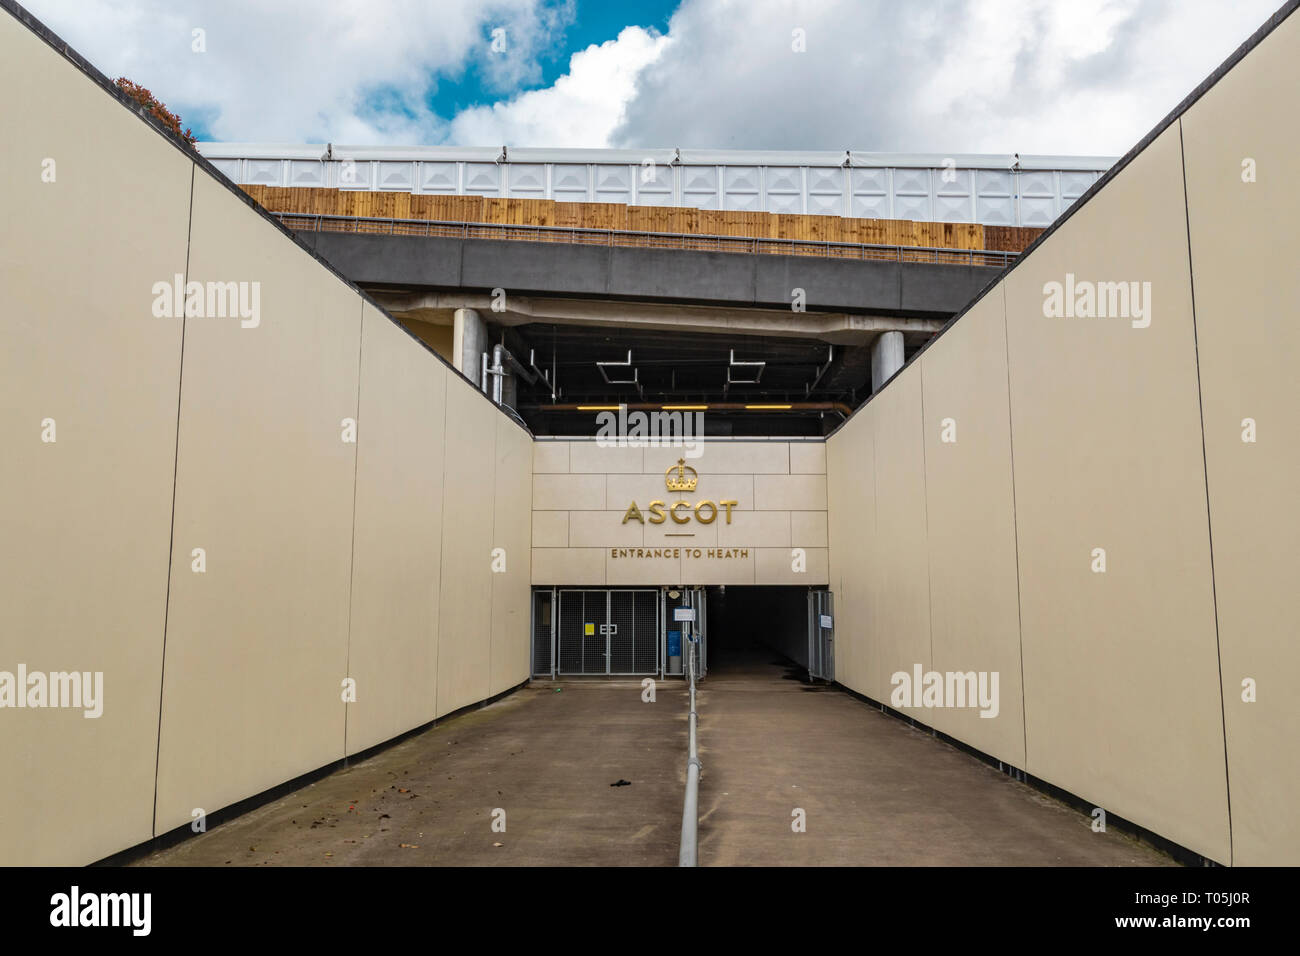 Ascot, England - March 17, 2019: Street view of the entrance of the iconic British Ascot racecourse heath, known for its horse racing. Stock Photo